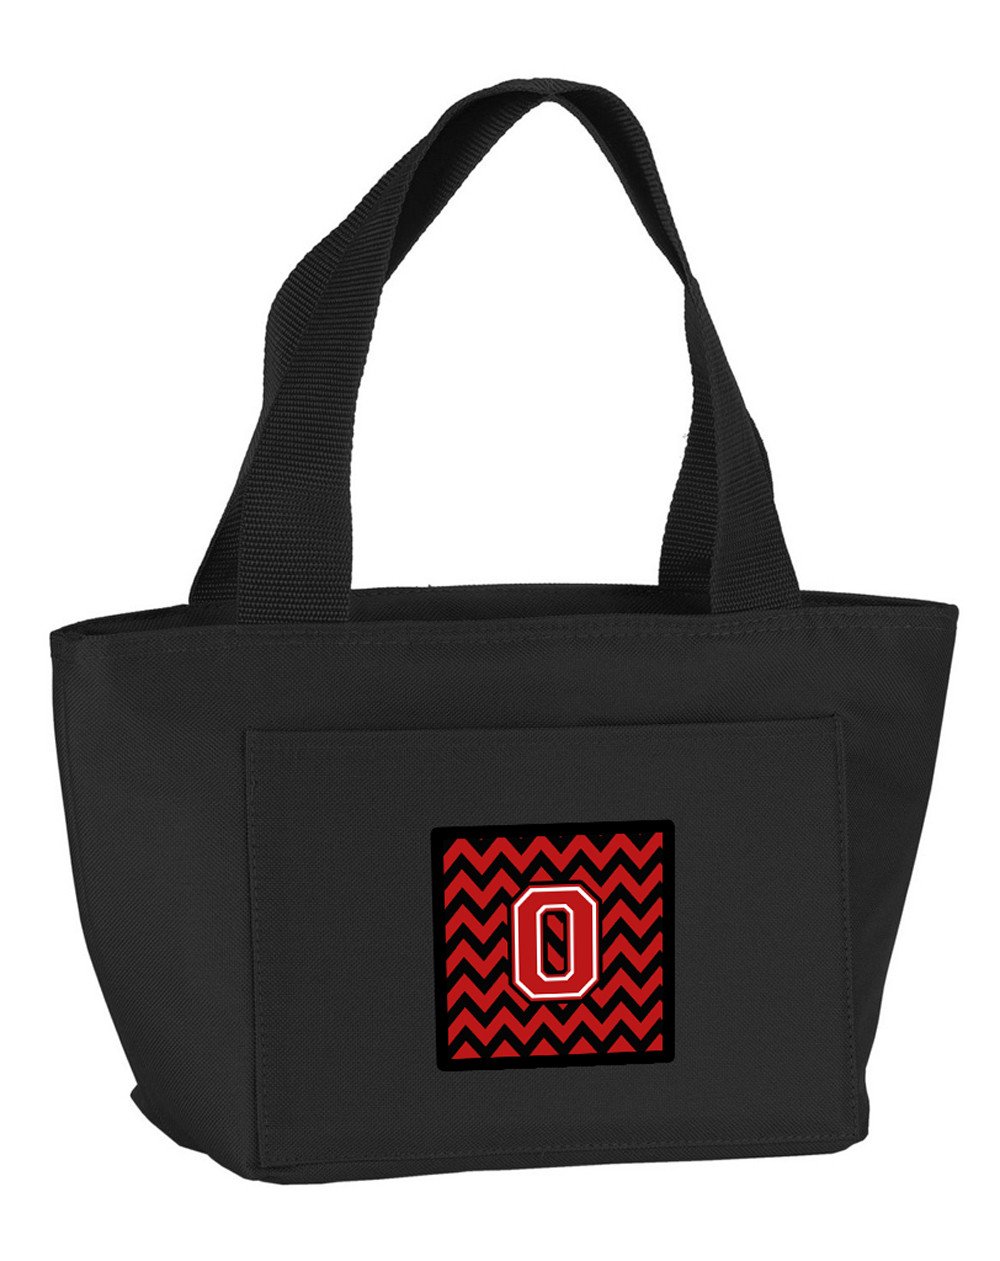 Letter O Chevron Black and Red   Lunch Bag CJ1047-OBK-8808 by Caroline's Treasures